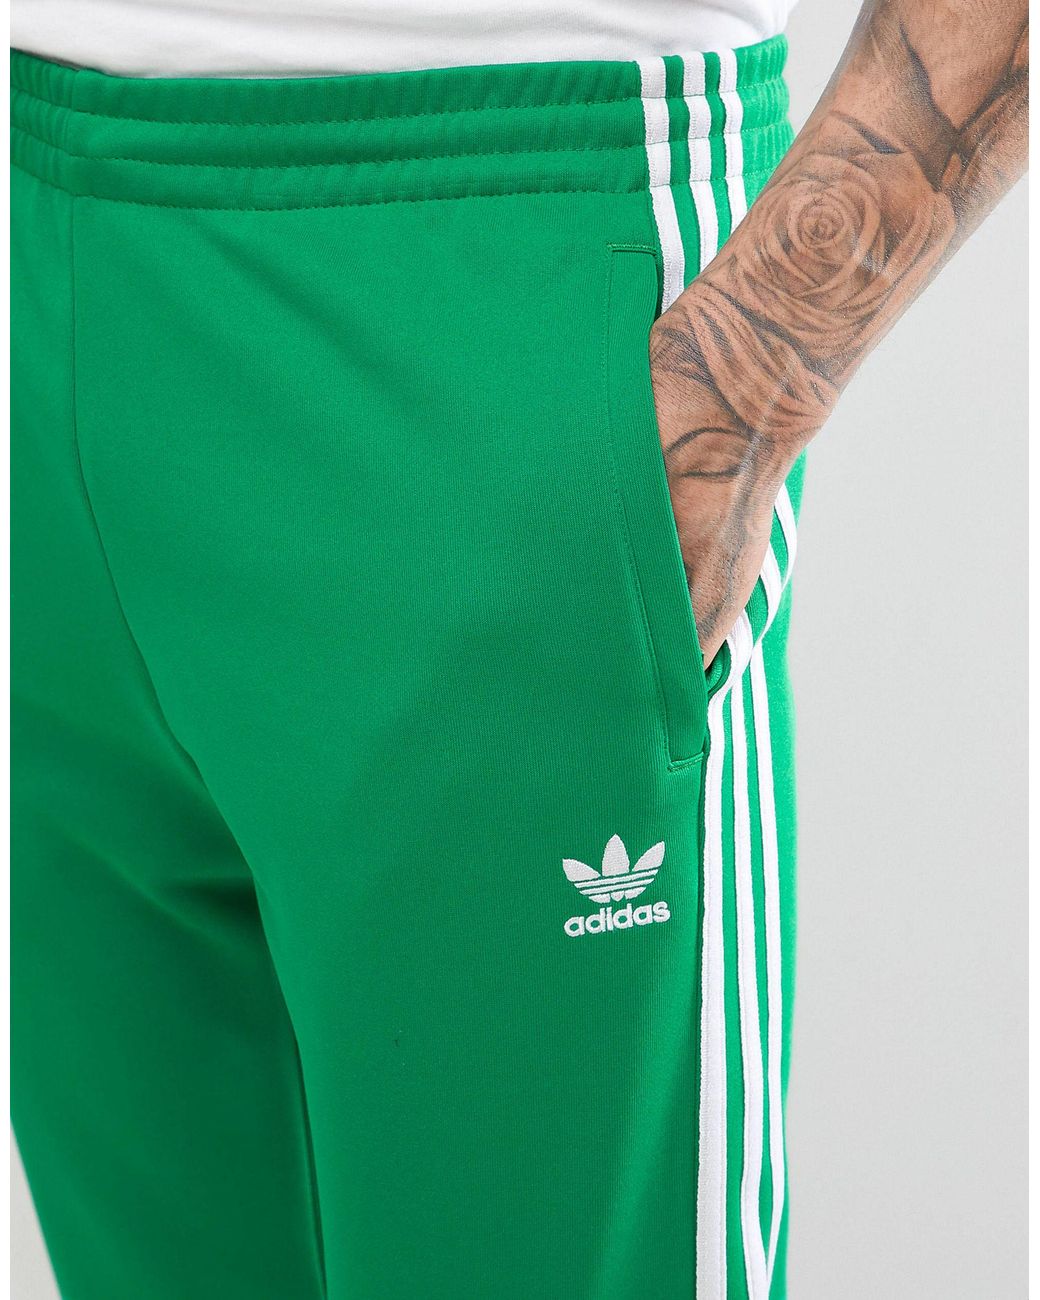 Adidas Green Track Pants  Buy Adidas Green Track Pants online in India